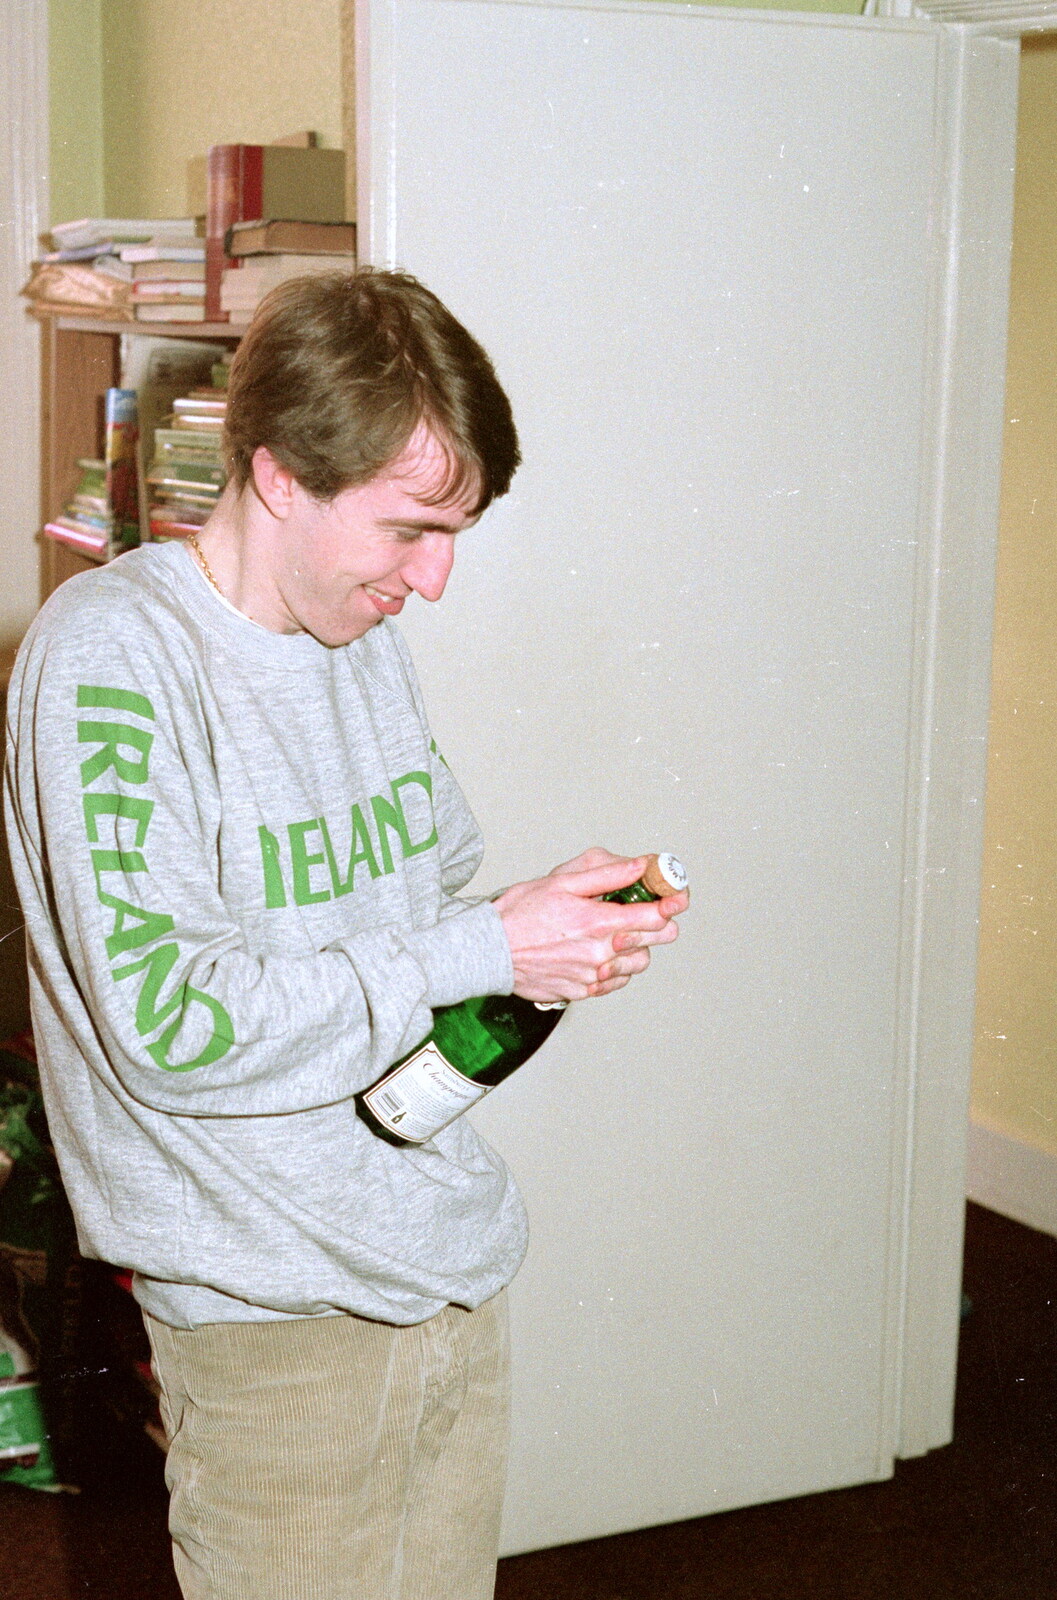 Dave pops his cork from Trotsky's Birthday, New Malden, Kingston Upon Thames - 20th April 1986